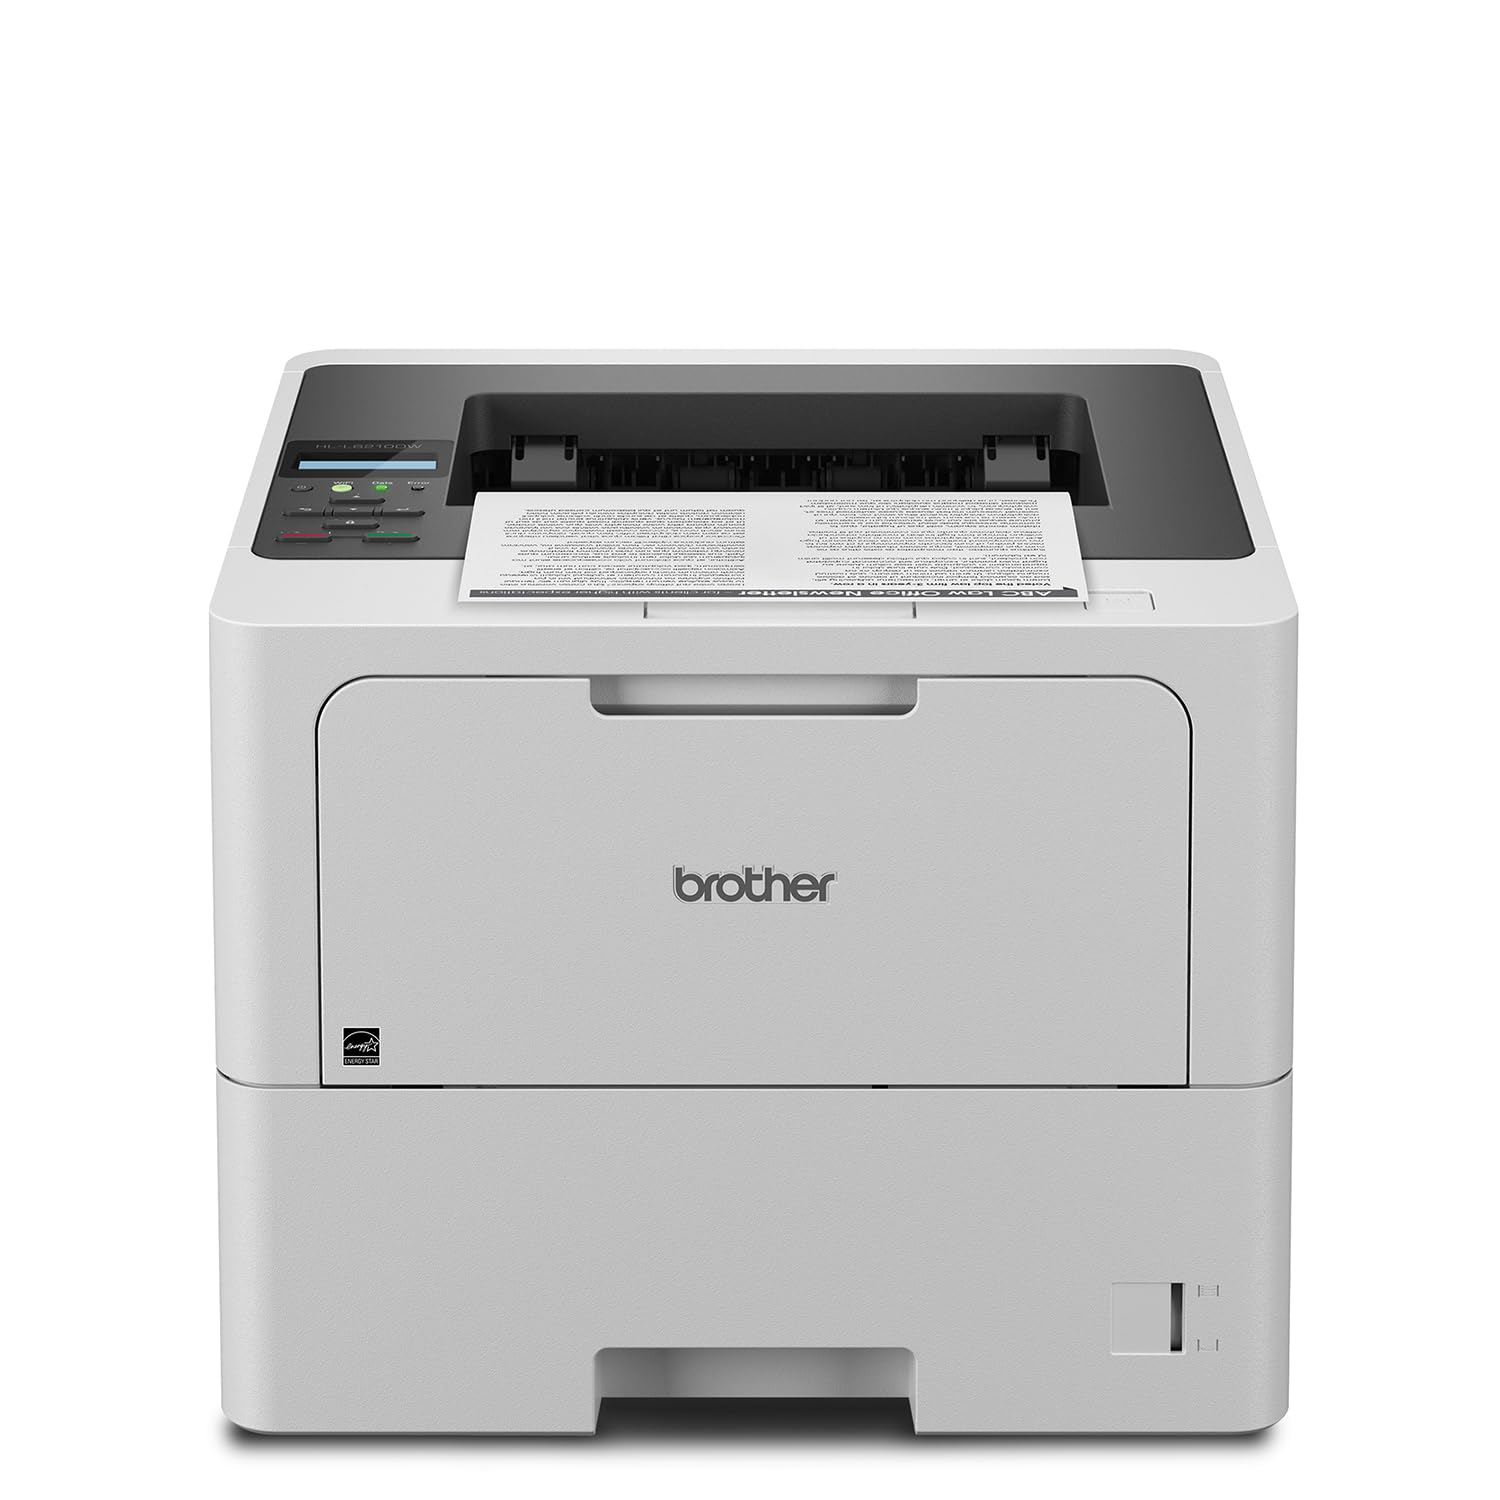 Brother HL-L6210DW Business Monochrome Laser Printer with Large Paper Capacity, Wireless and Gigabit Ethernet Networking, Low-Cost Printing, Duplex Printing, and Mobile Printing